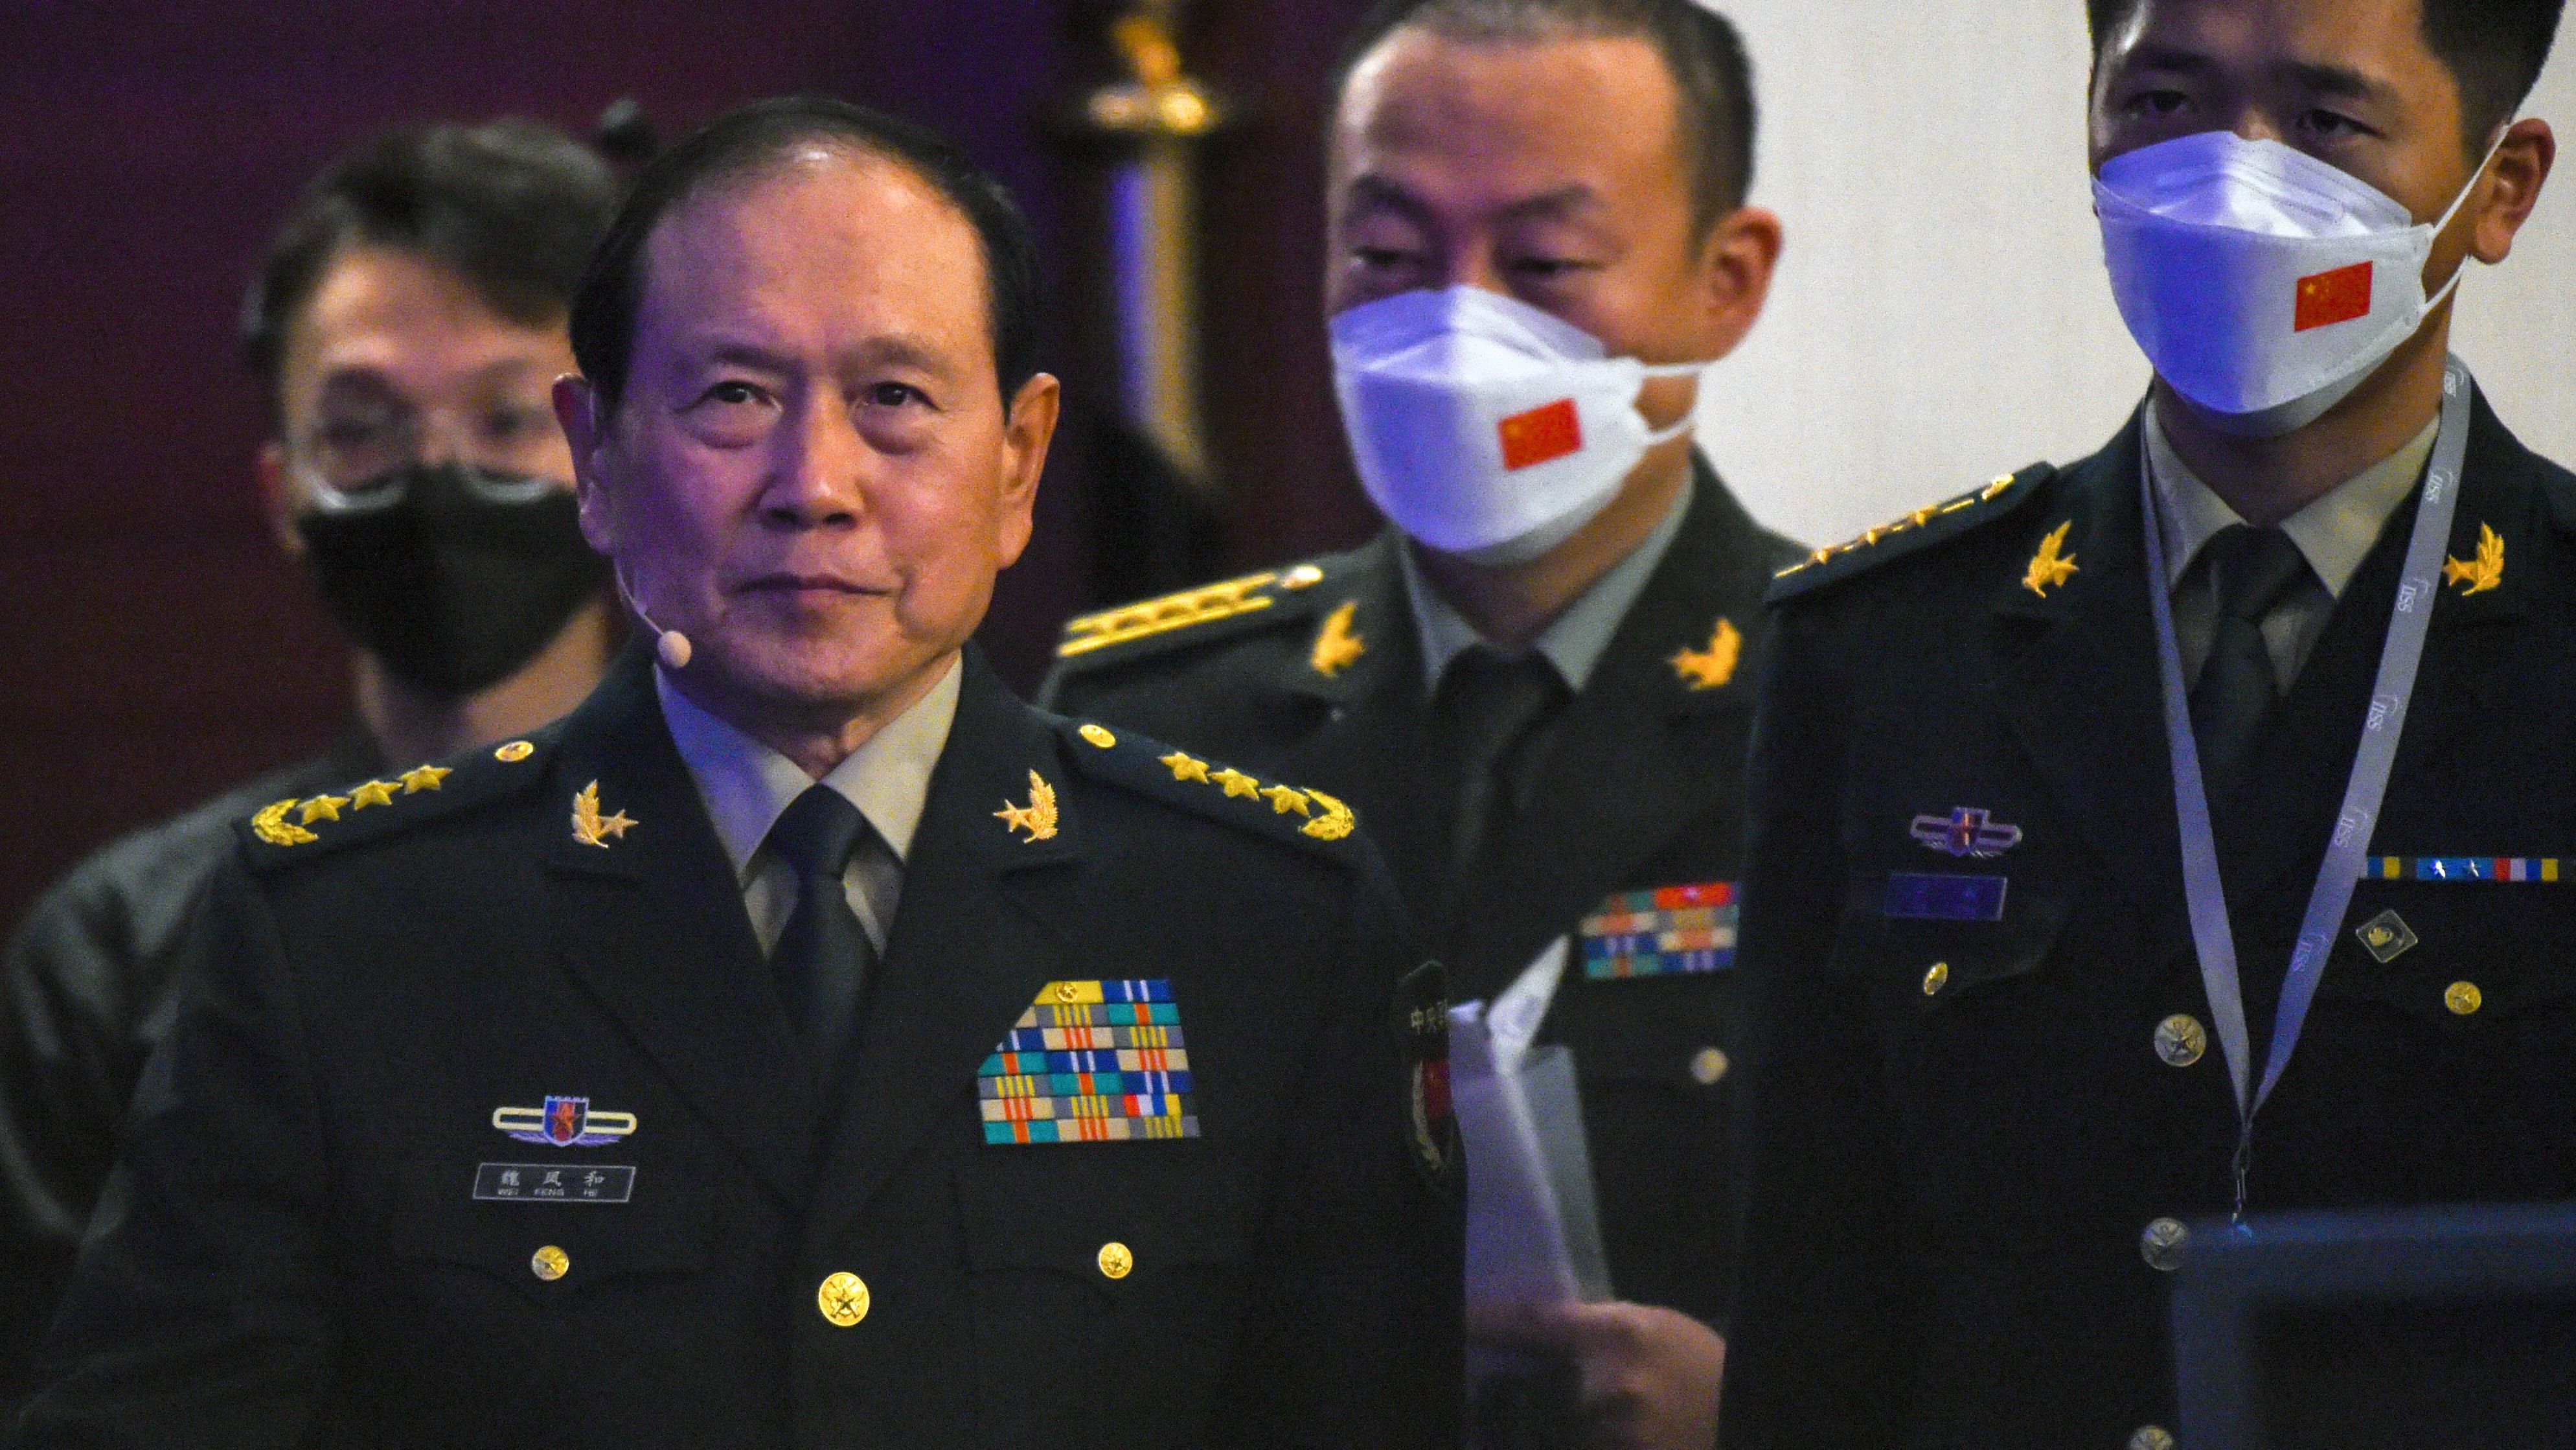 China's Defense Minister Wei Fenghe at the Shangri-La Dialogue summit in Singapore on June 12.